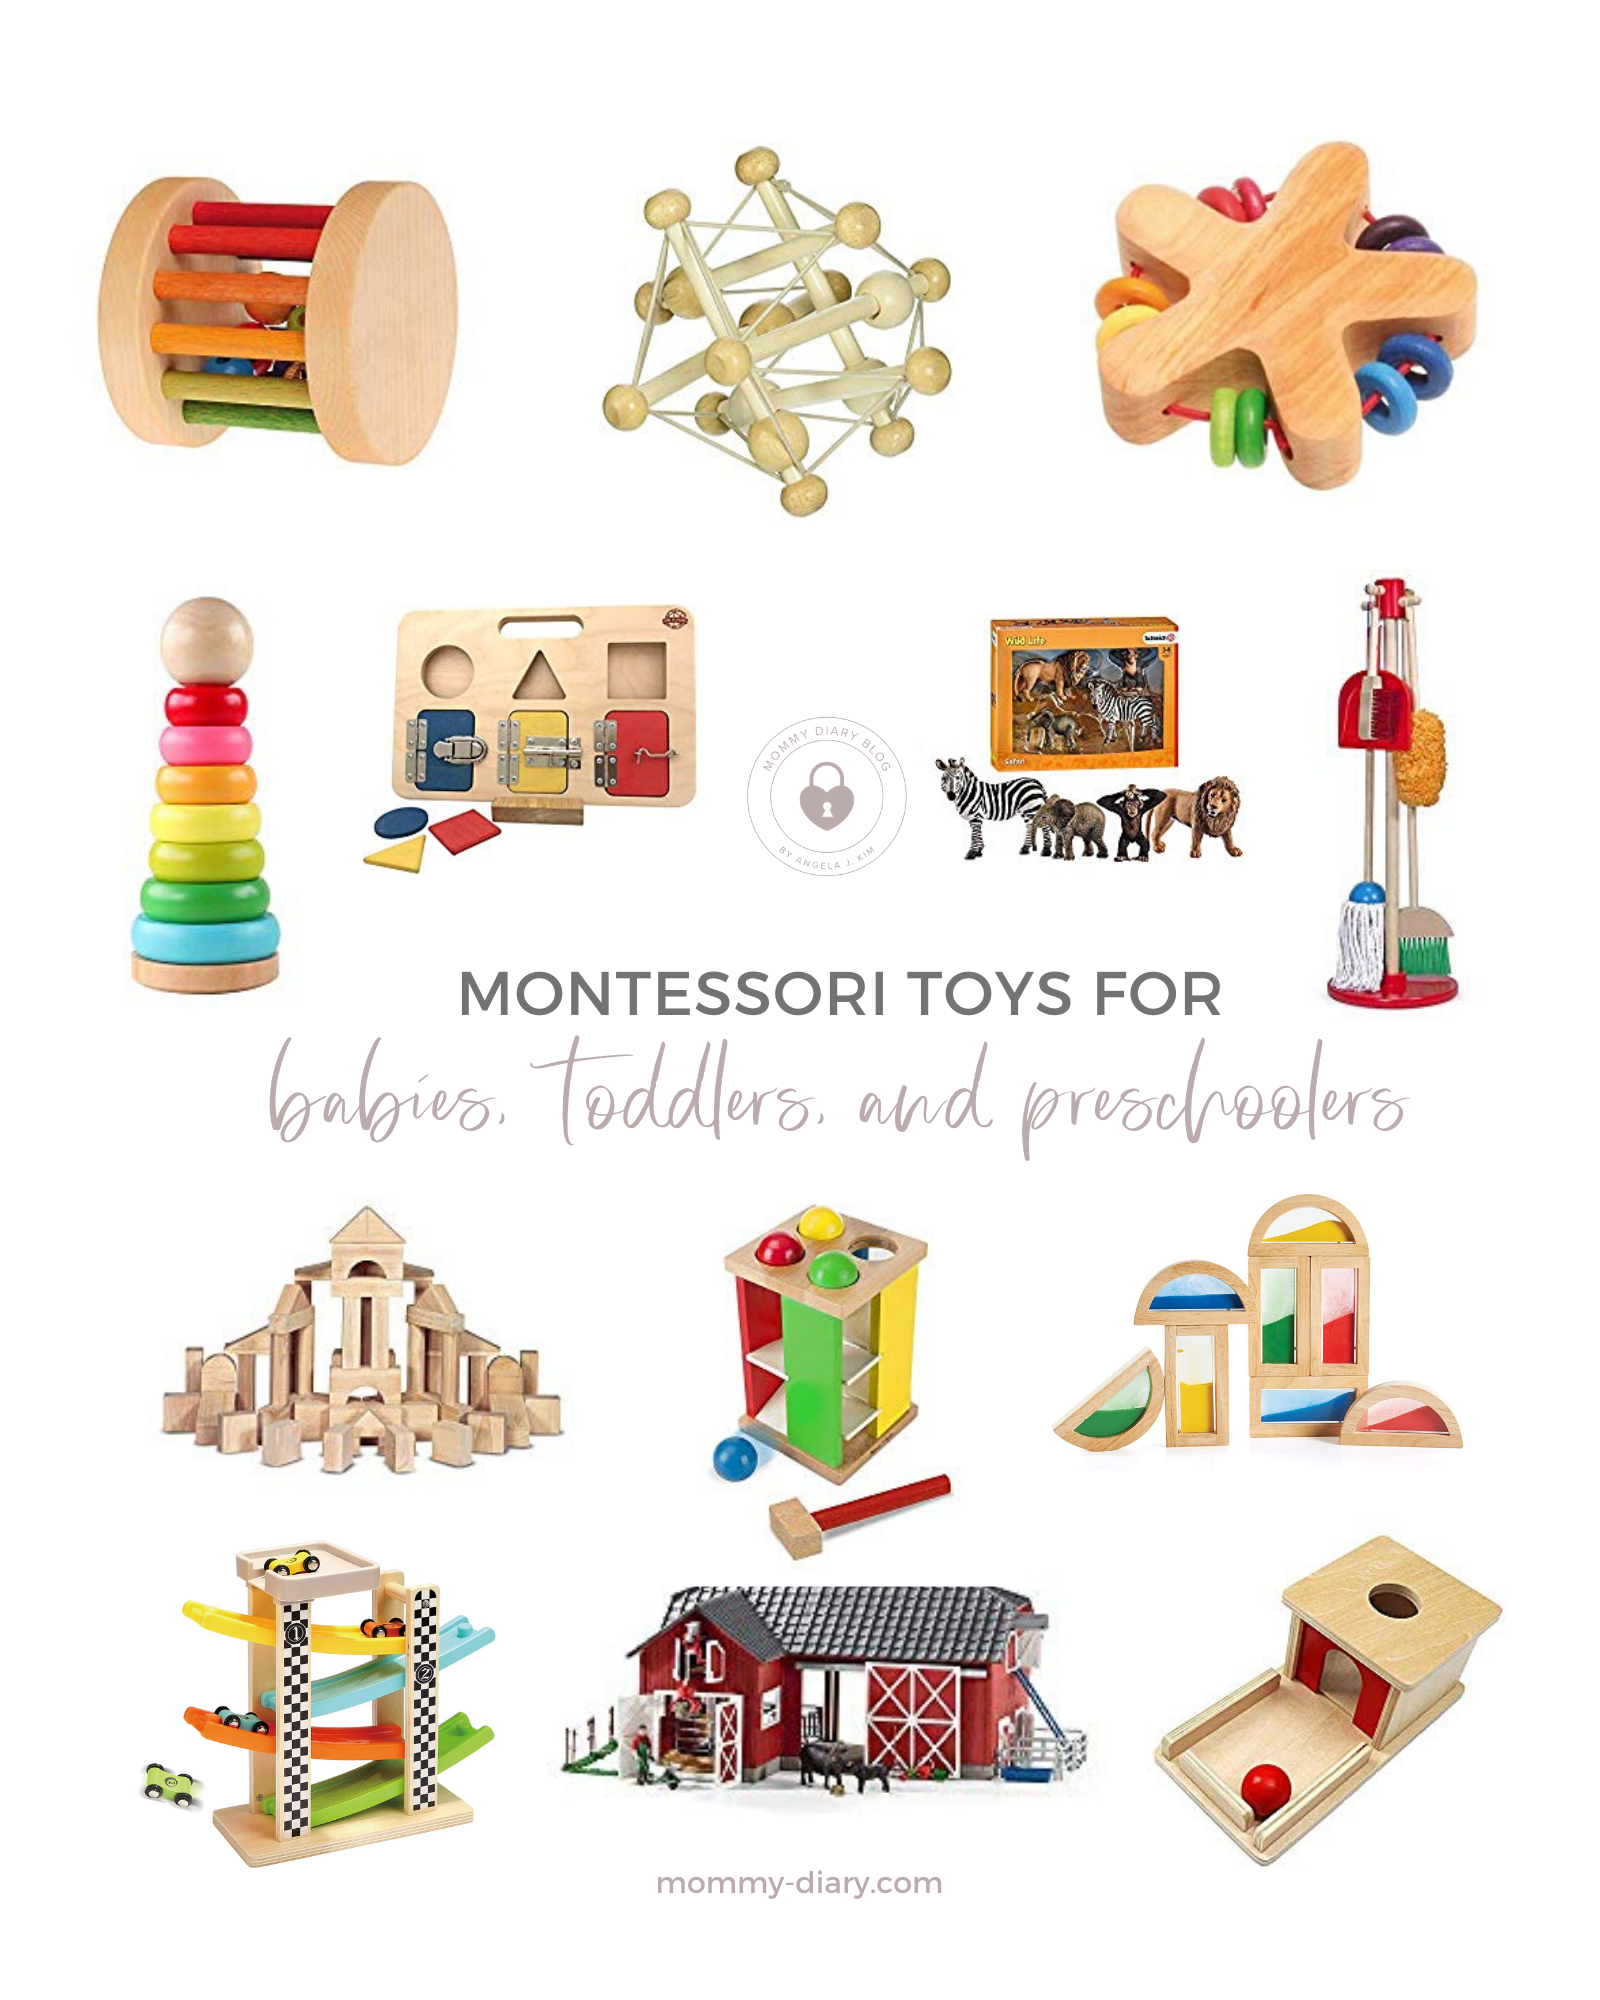 Best Montessori Toys for Babies, Toddlers, and Preschoolers